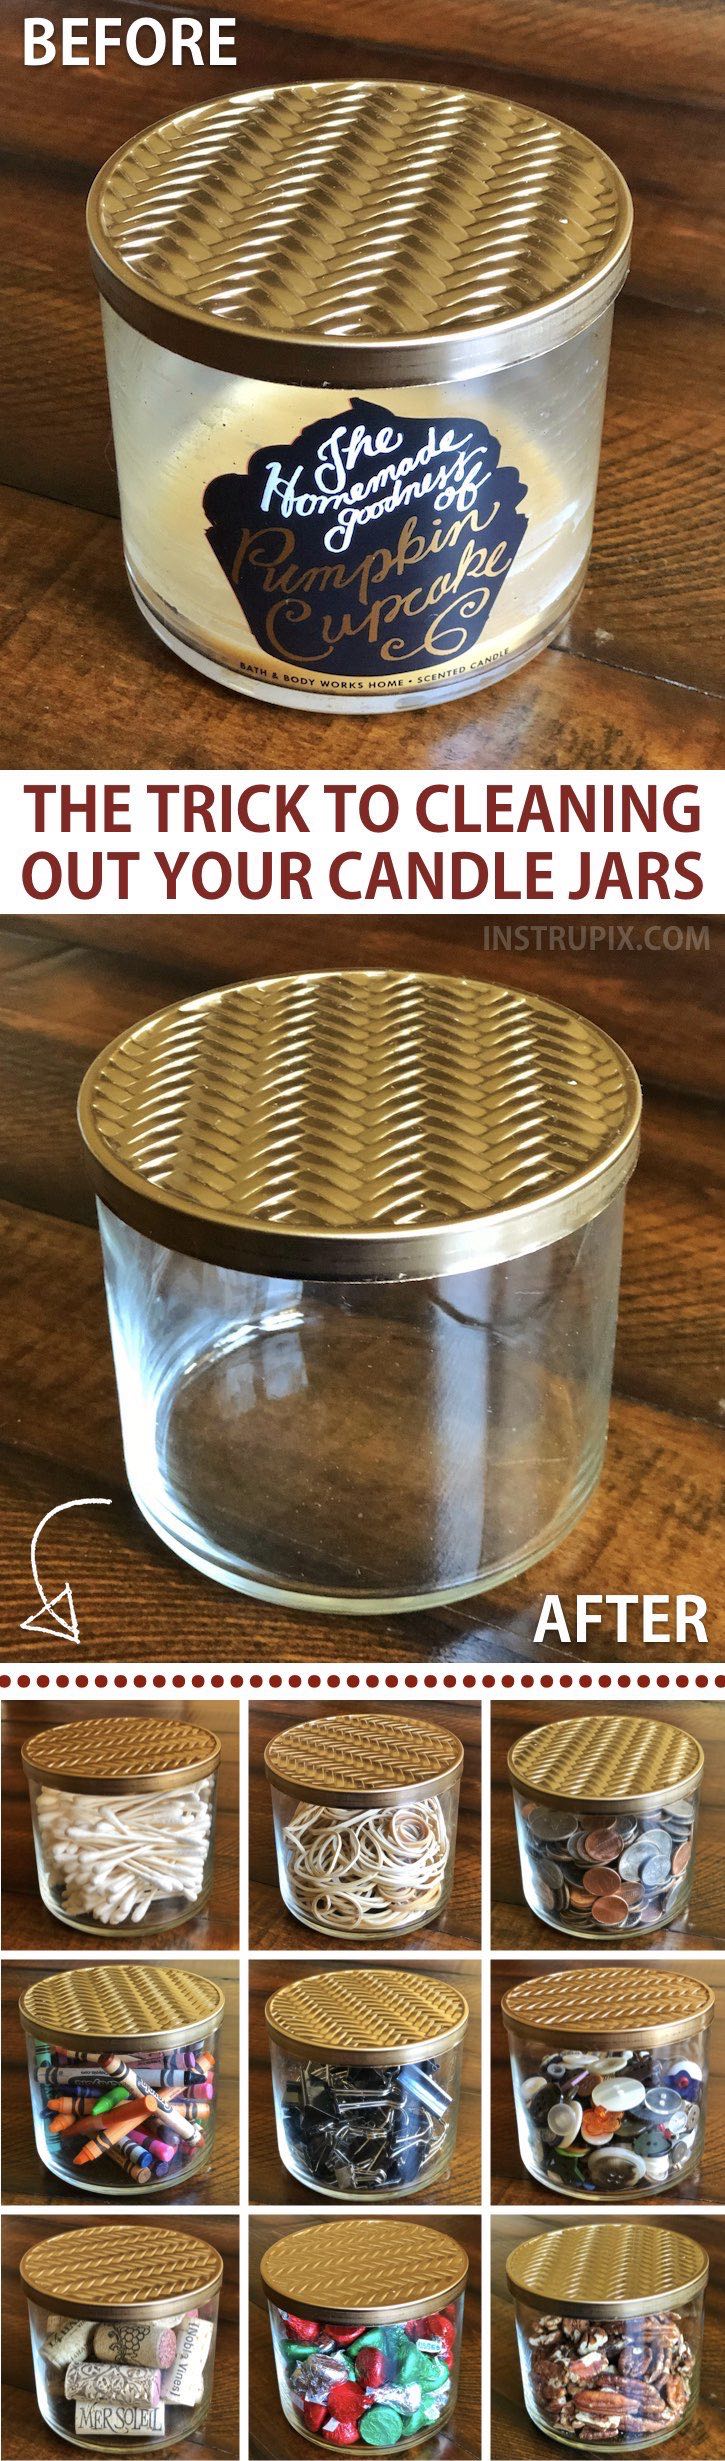 DIY: How to get wax out of candle jars! This easy trick takes hardly any effort at all, and is a great way to recycle, repurpose and reuse. Recycled projects and crafts are always my favorite because they're either really cheap or cost nothing at all. You could even sell these as pretty storage jars! A life hack everyone should know. Instrupix.com